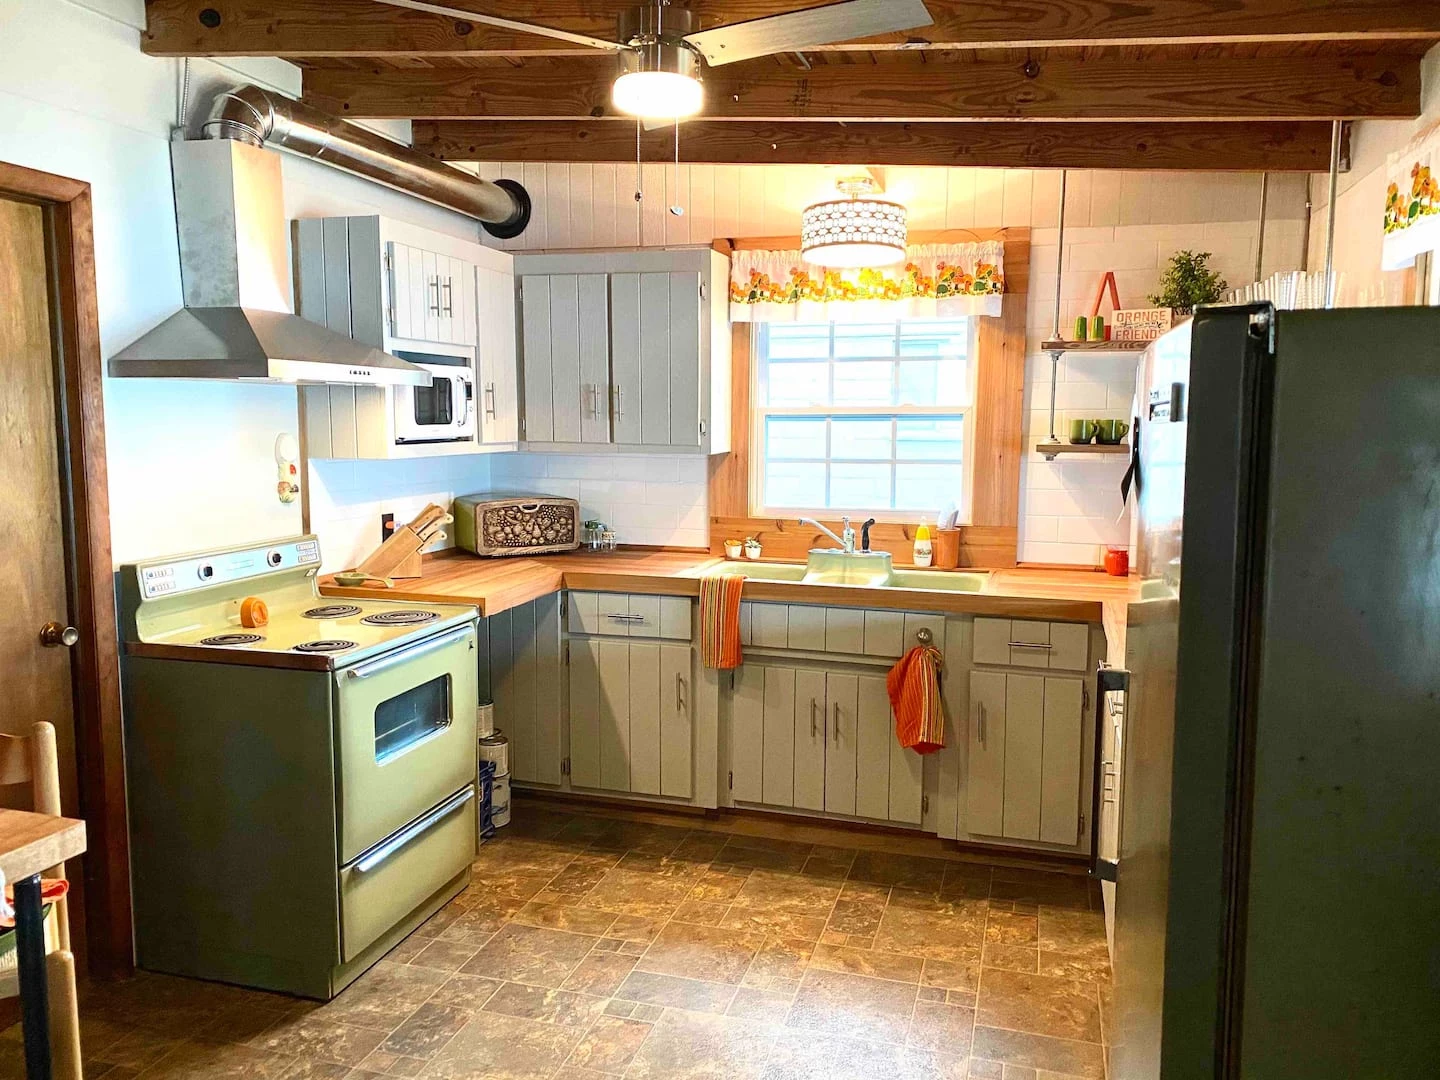 Check Out This Cool 70s Themed Airbnb In Alabama